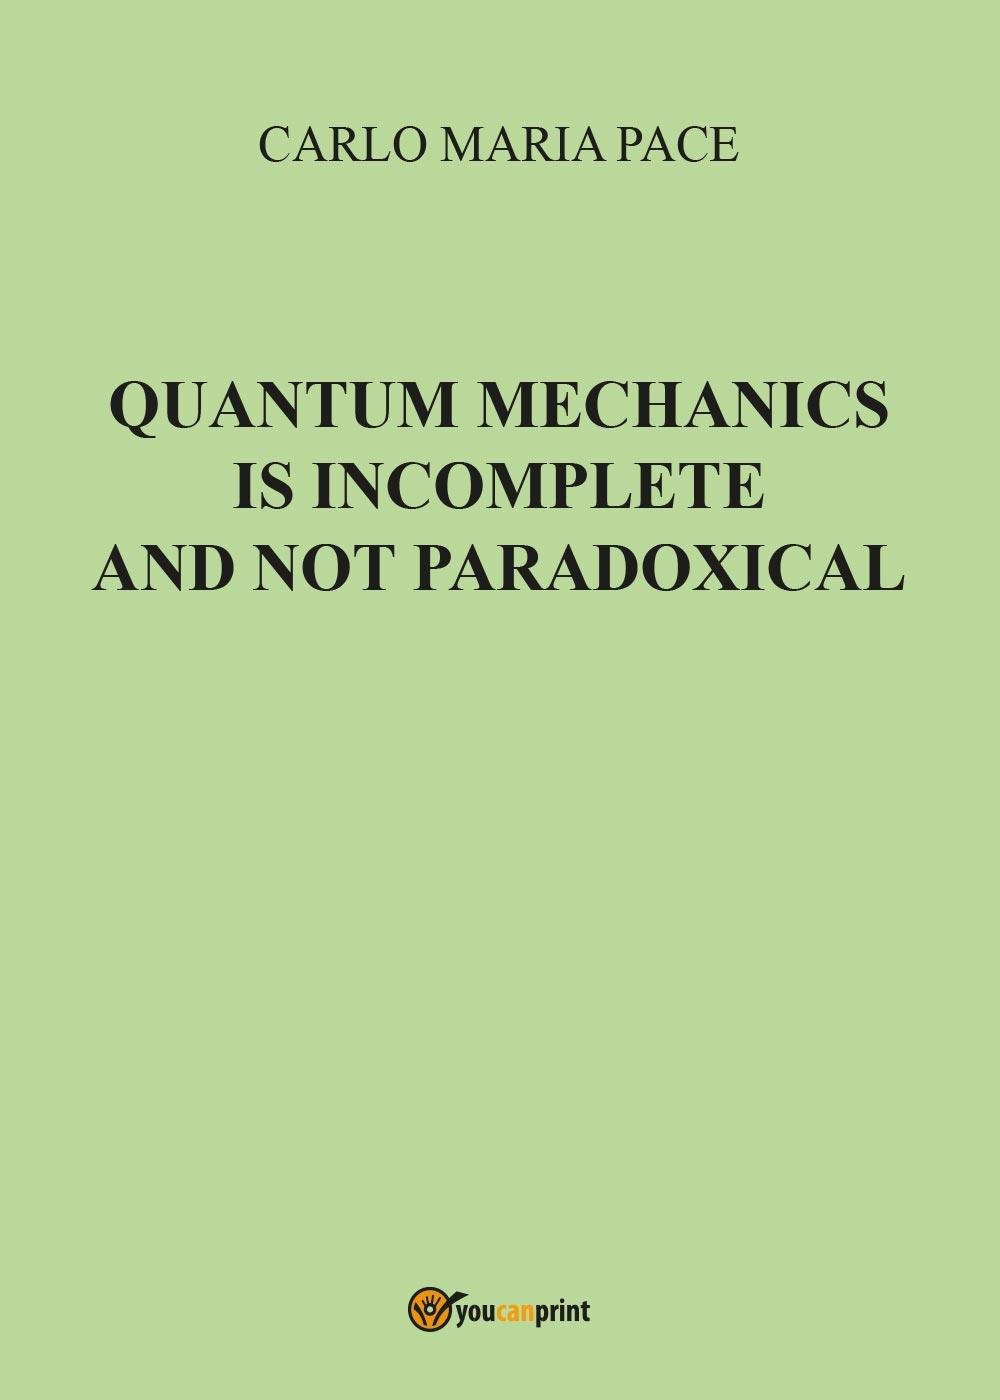 Quantum Mechanics is incomplete and not paradoxical